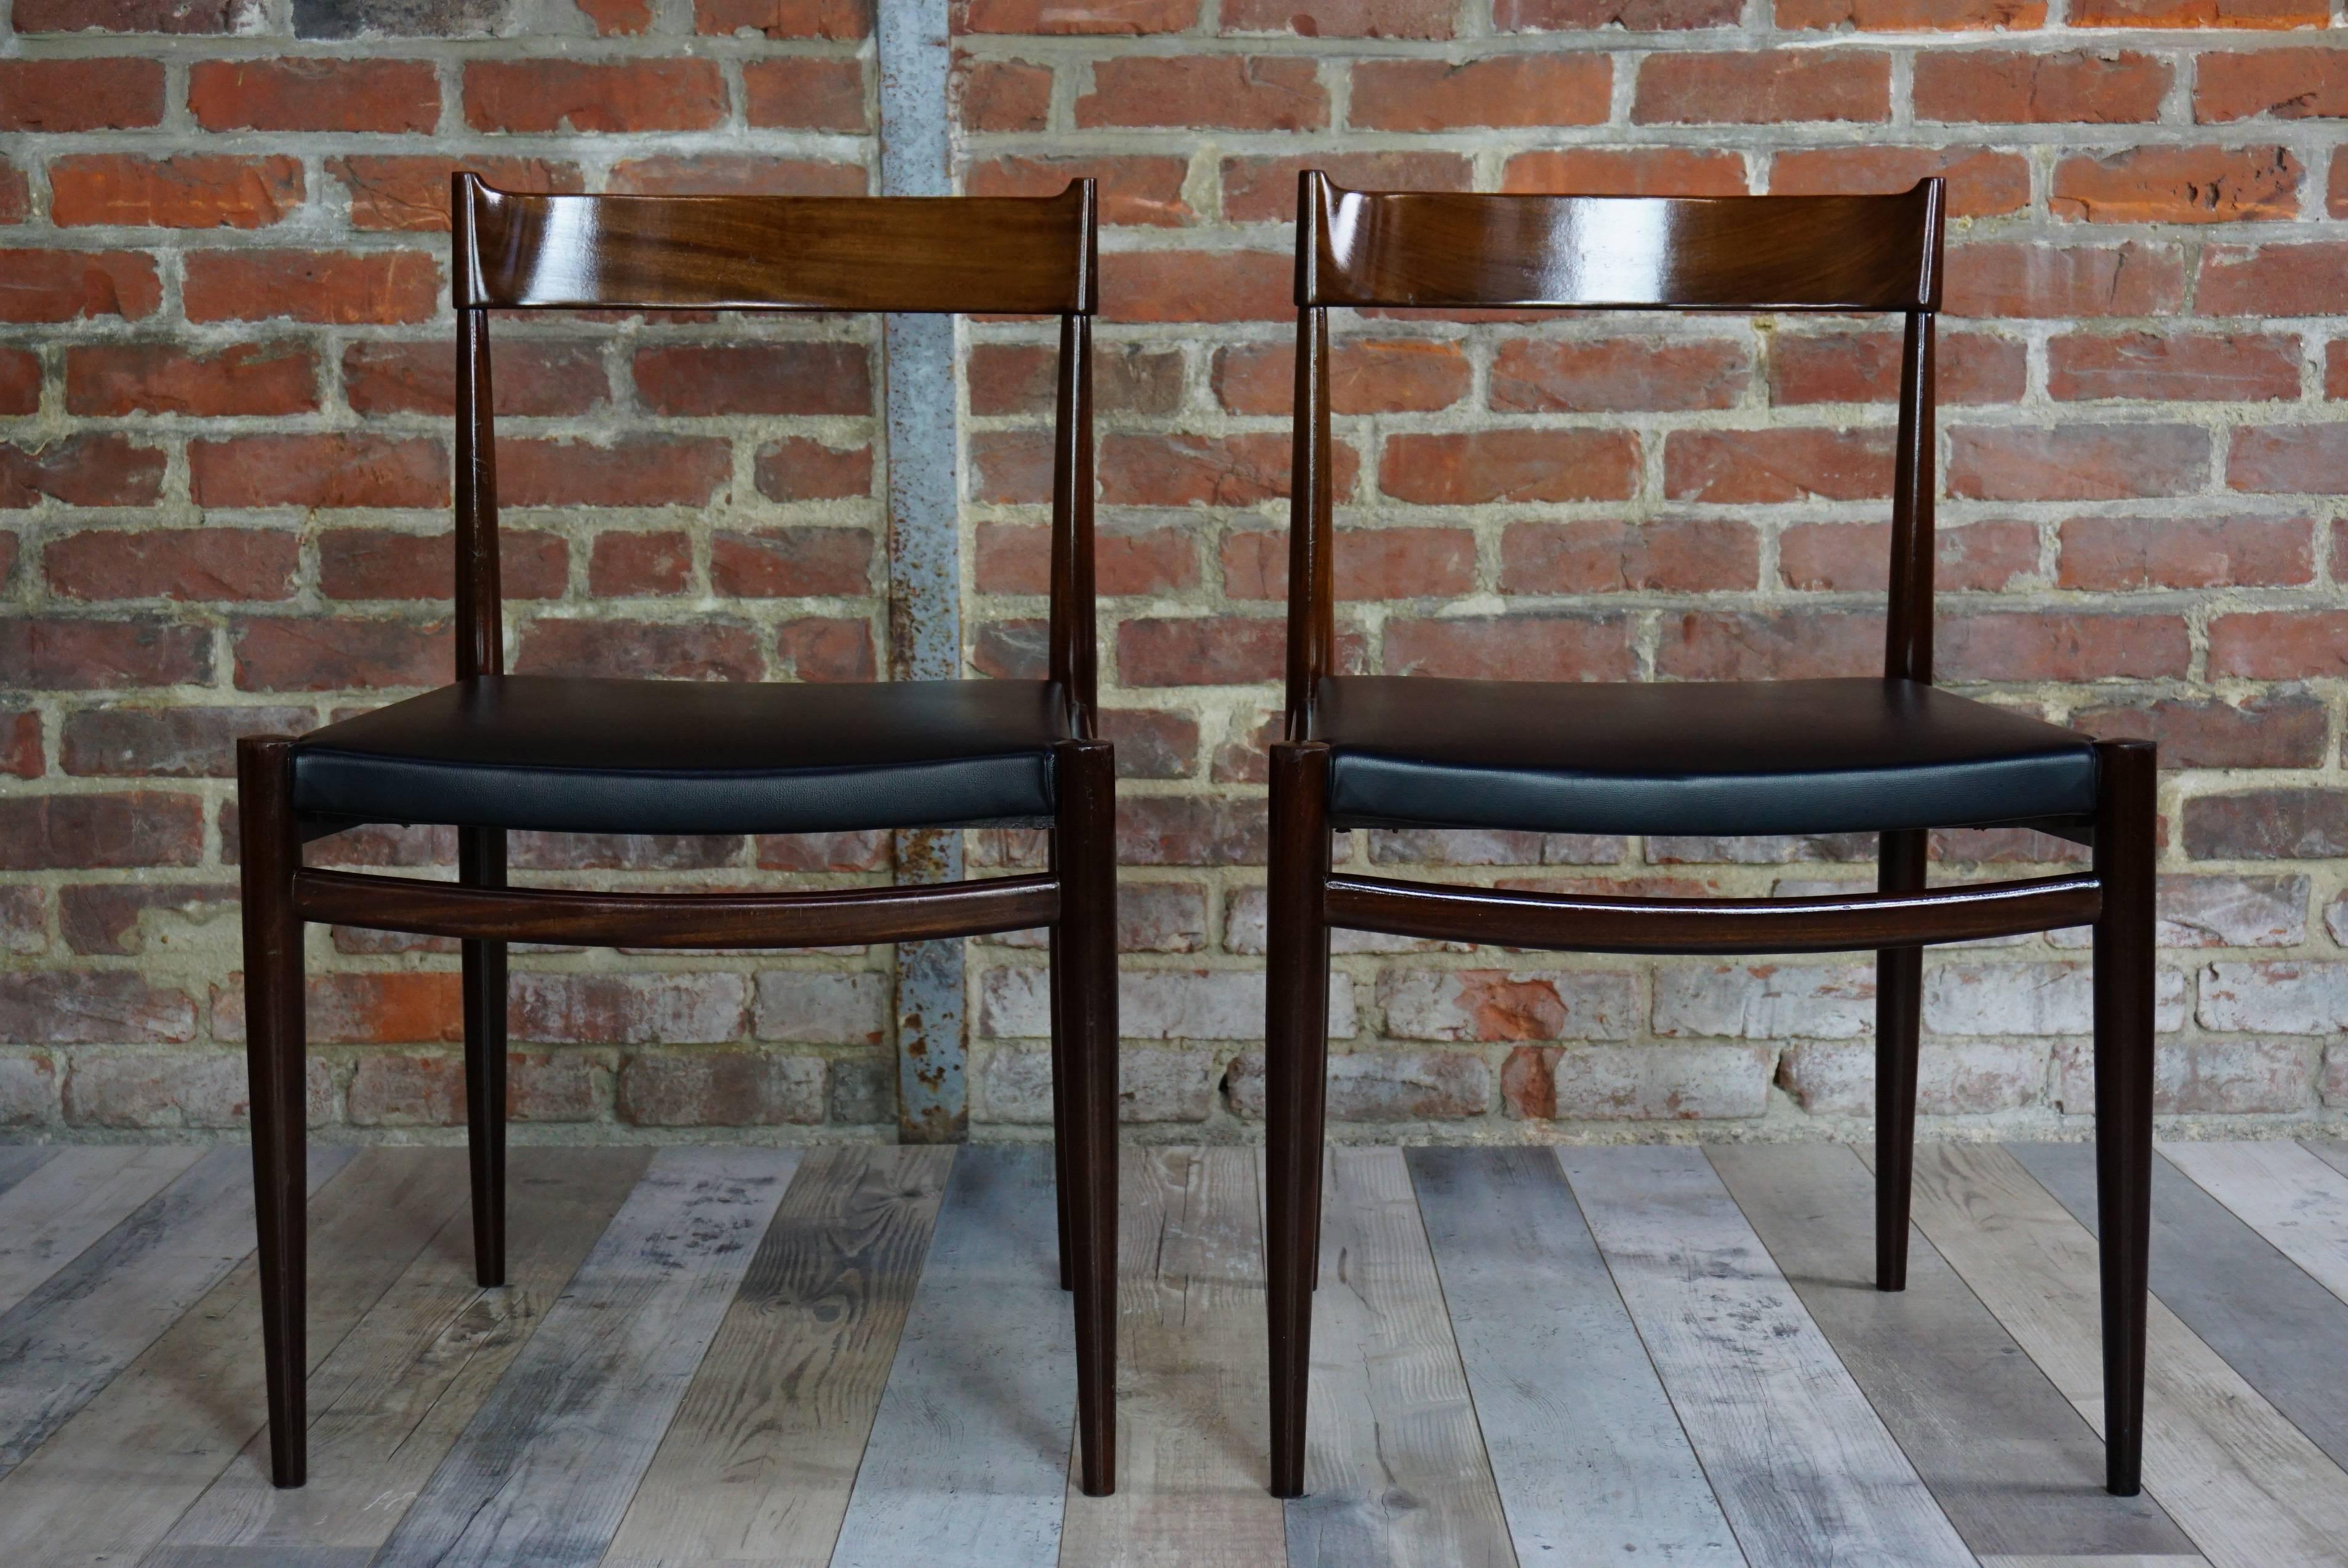 European Pair of Teak Chairs and Faux Black Leather Design from the 1950s